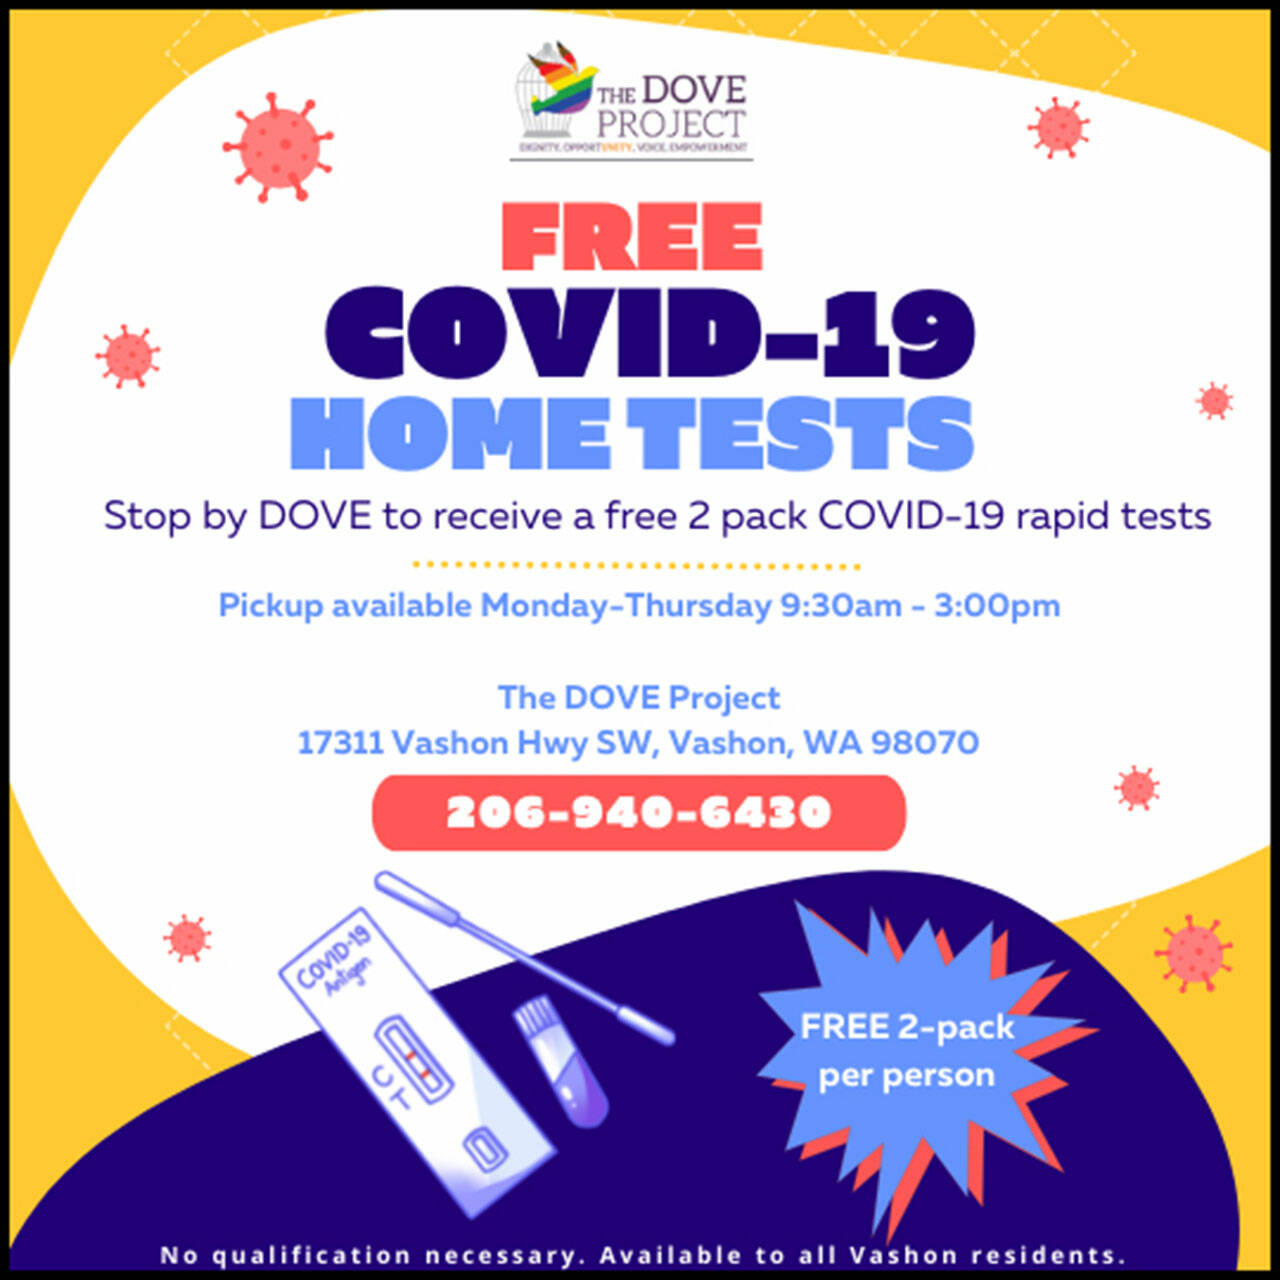 All islanders can get free home rapid tests by stopping by The DOVE Project. DOVE arranged a grant to fund the new community service. (Courtesy Graphic)